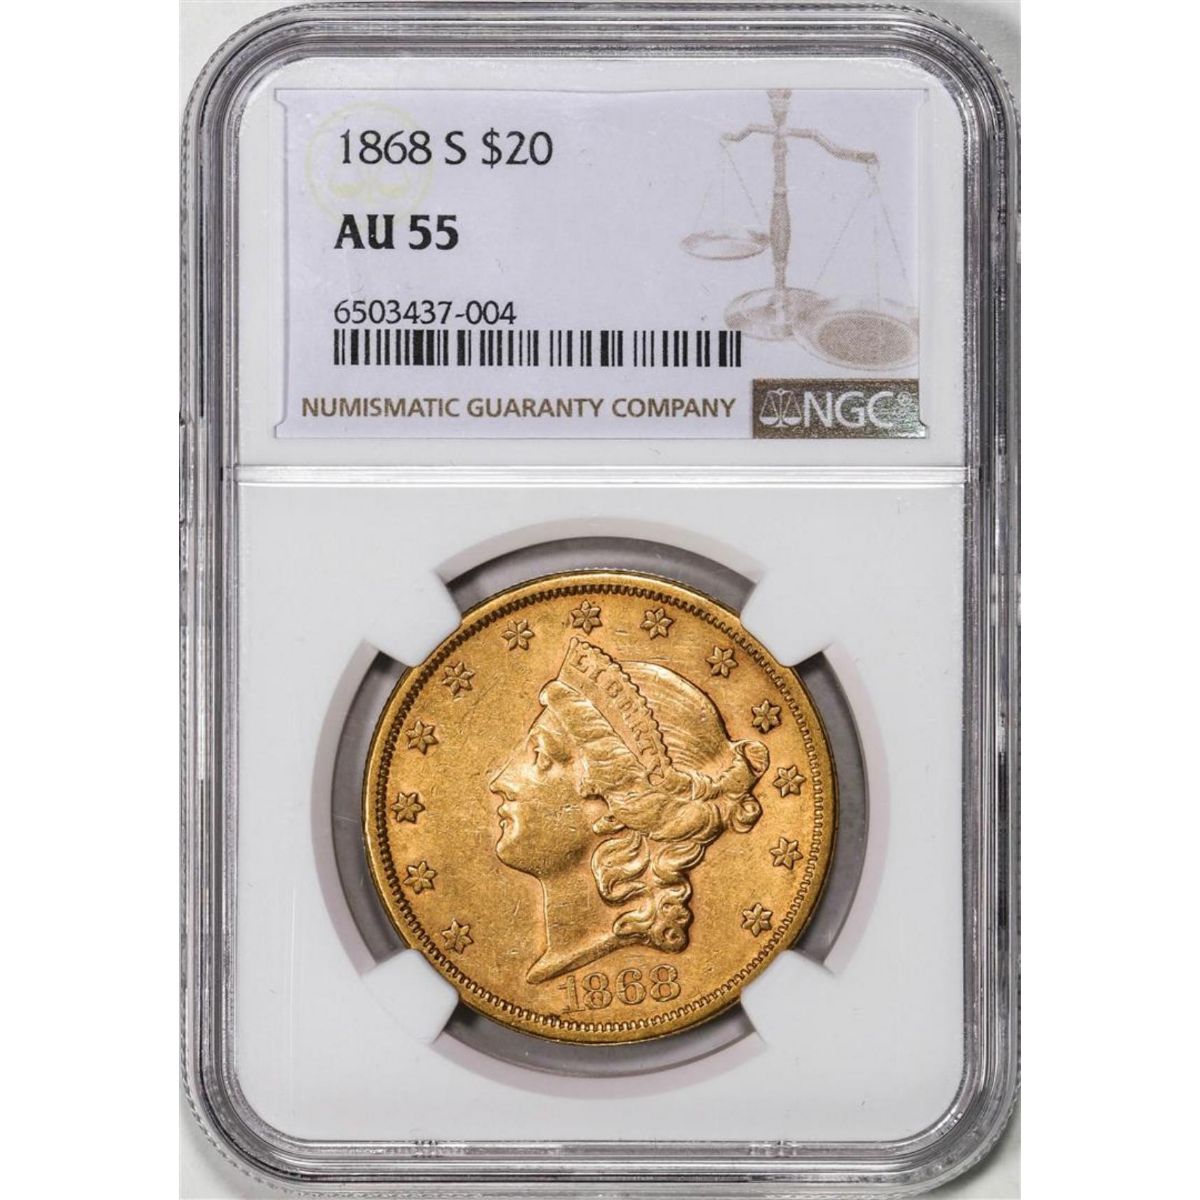 BK Auctions – Currency, Art, Gold & Silver Coin Event!